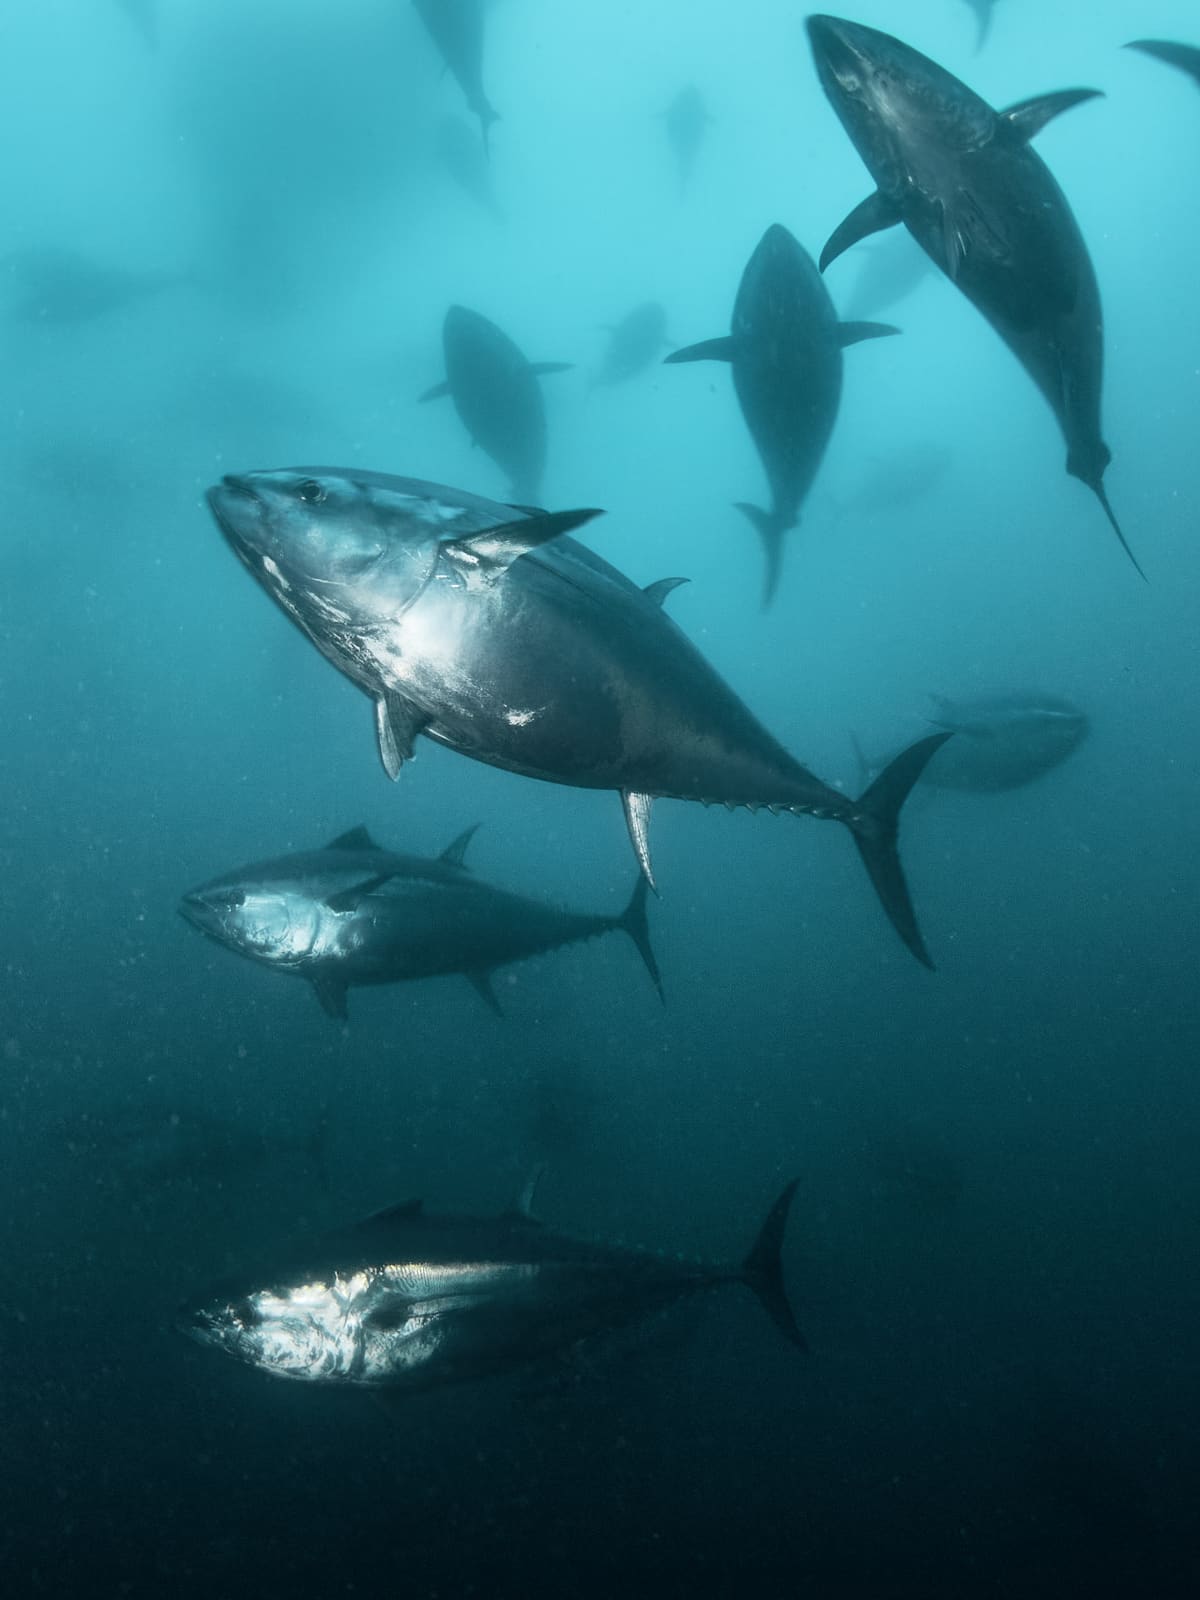 The bluefin tuna, common tuna or Atlantic bluefin tuna, is a species of tuna belonging to the Scombridae family. Those individuals that exceed 150 kilograms are known as giant bluefin tuna.